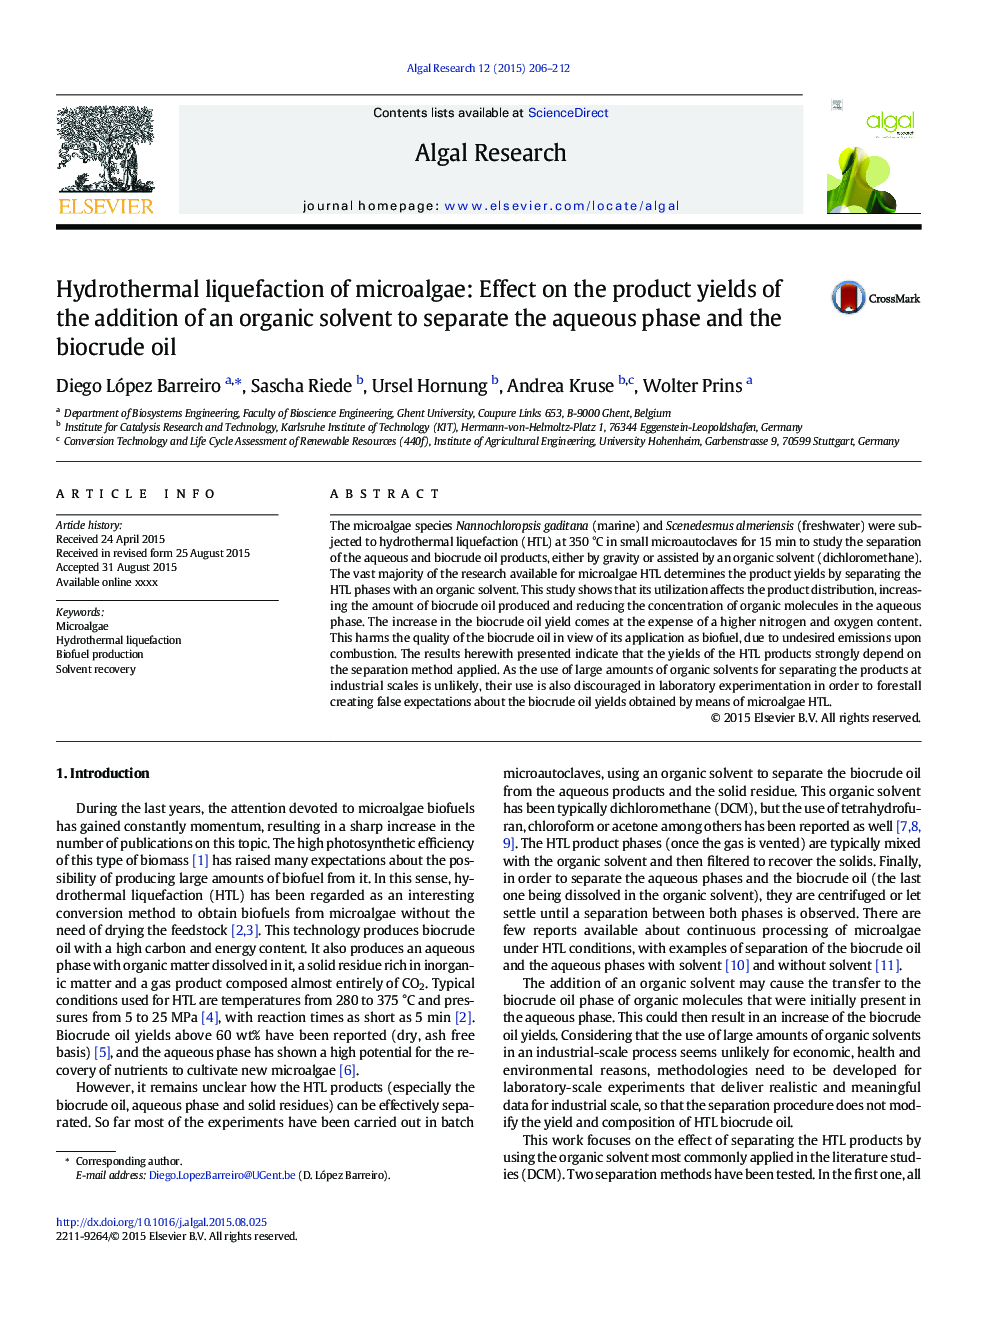 Hydrothermal liquefaction of microalgae: Effect on the product yields of the addition of an organic solvent to separate the aqueous phase and the biocrude oil